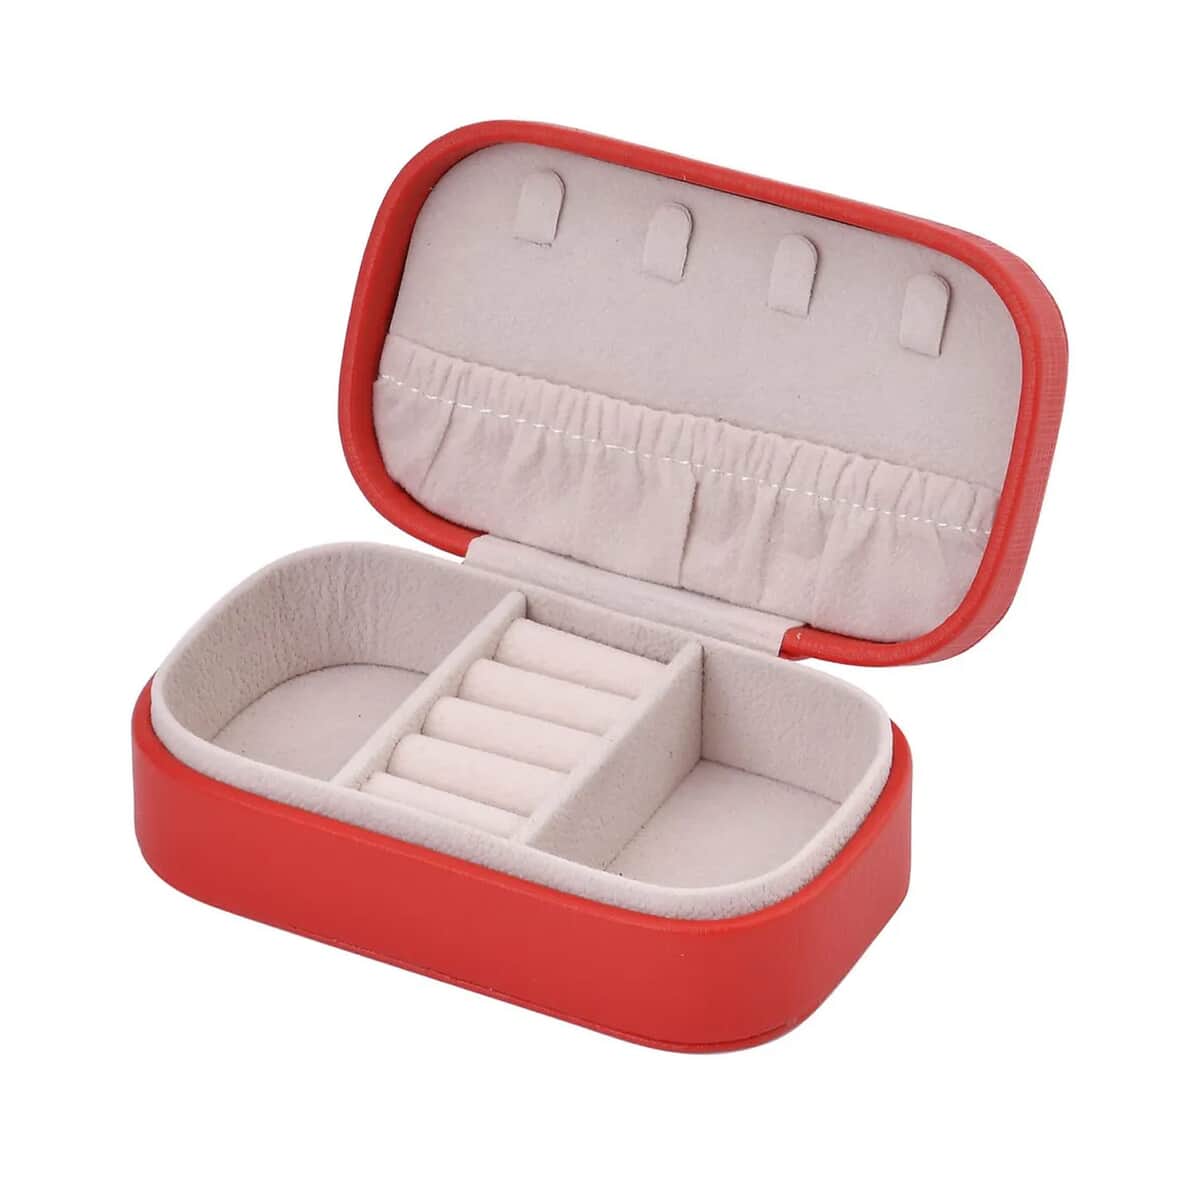 Red Faux Leather Oval Shape Jewelry Box (4 Necklace Hooks, Pouch Pocket, 4 Ring Slot) image number 6